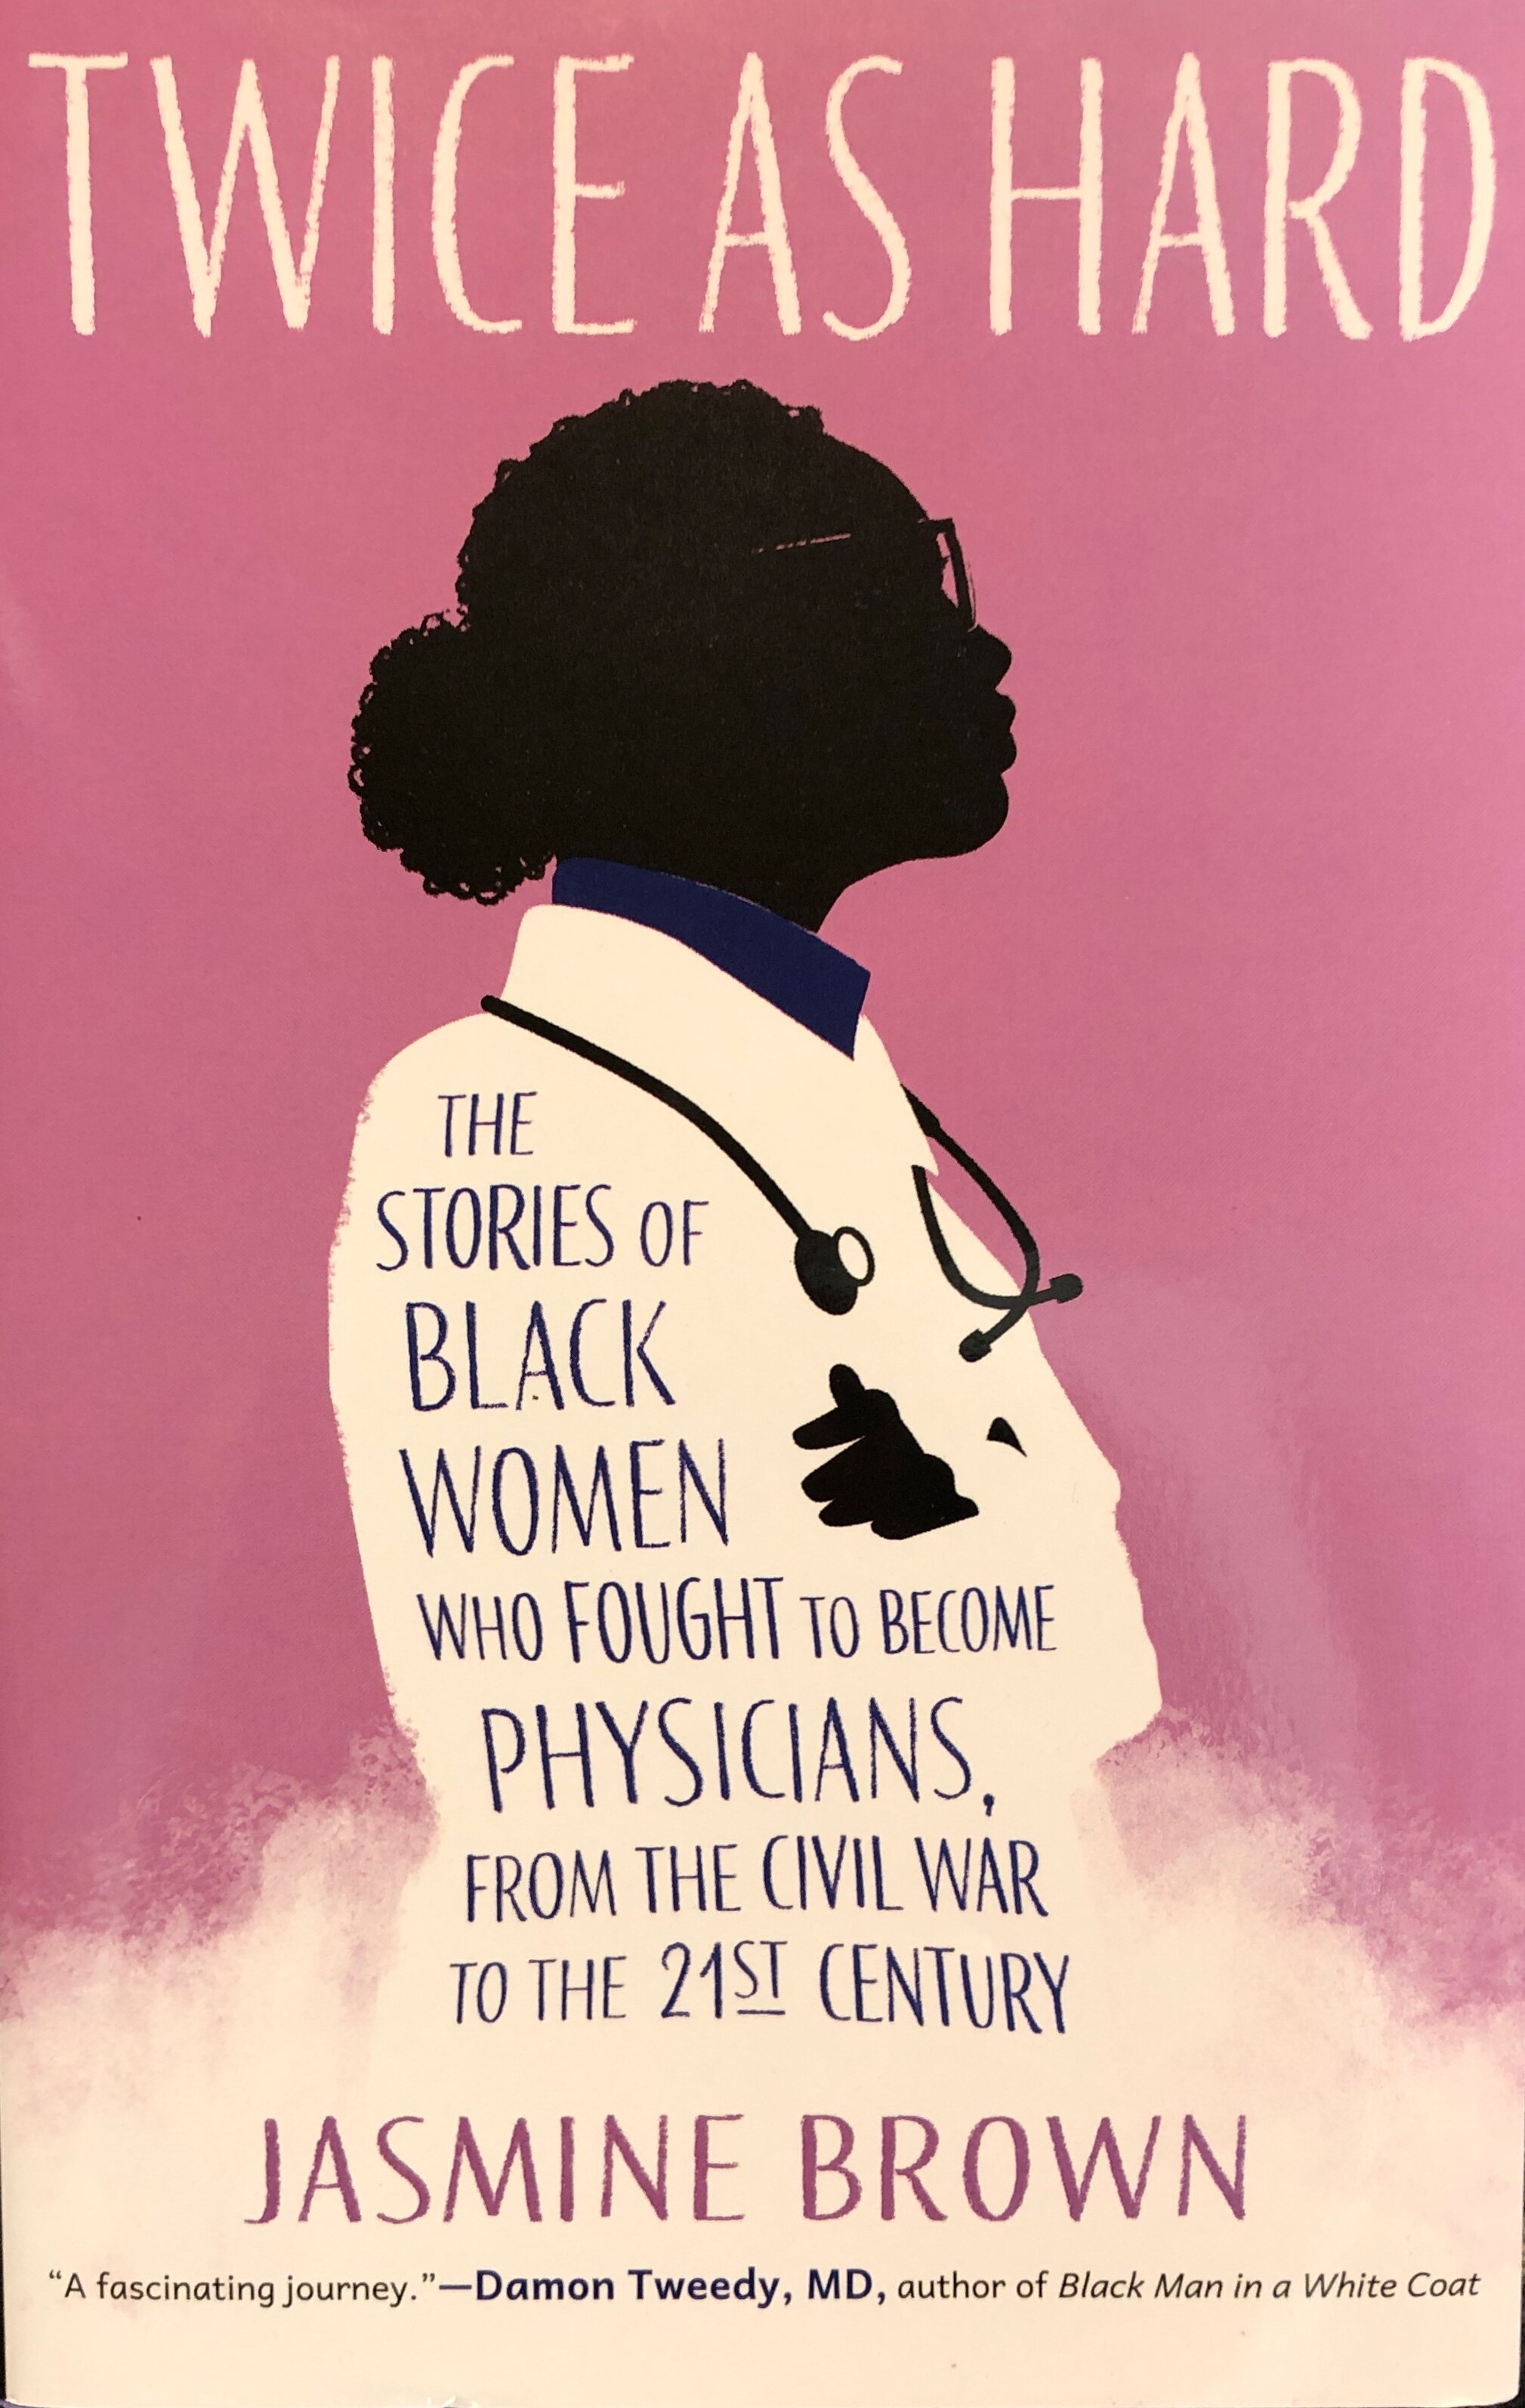 Twice as Hard: The Stories of Black Women Who Fought to Become Physicians  from the Civil War to the 21st Century